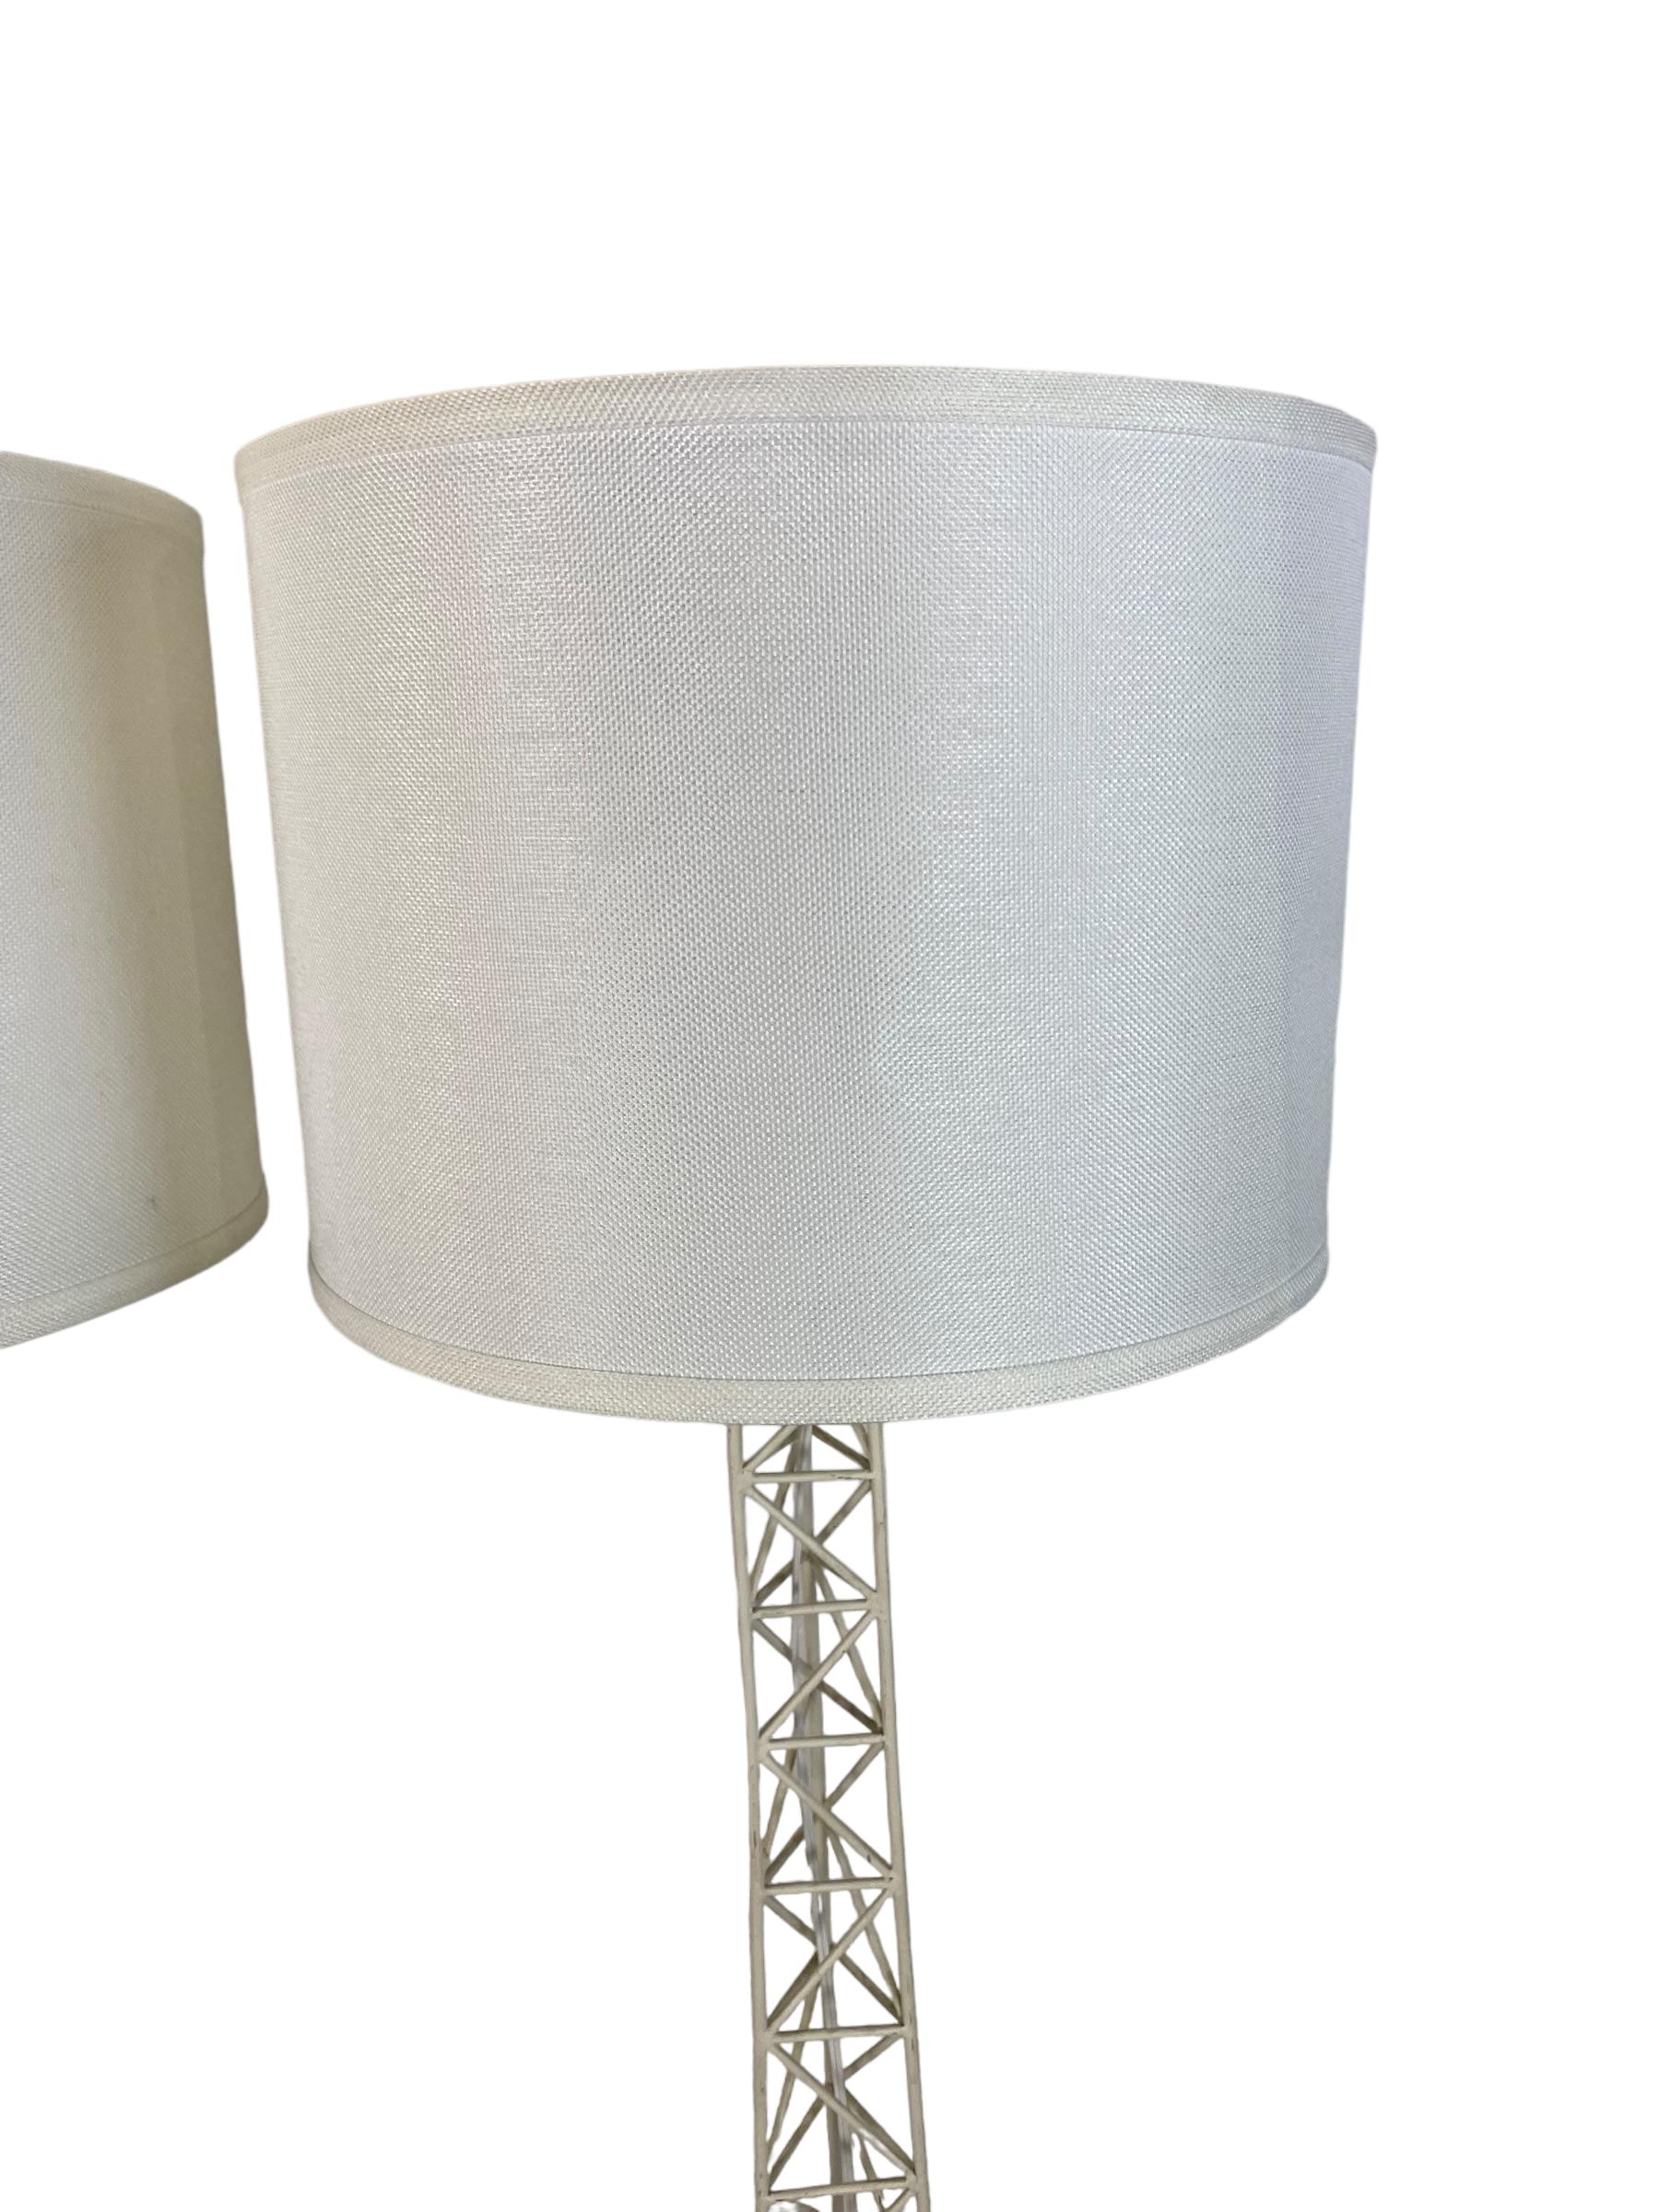 Eiffel Tower Style Vintage Floor Lamps For Sale 2